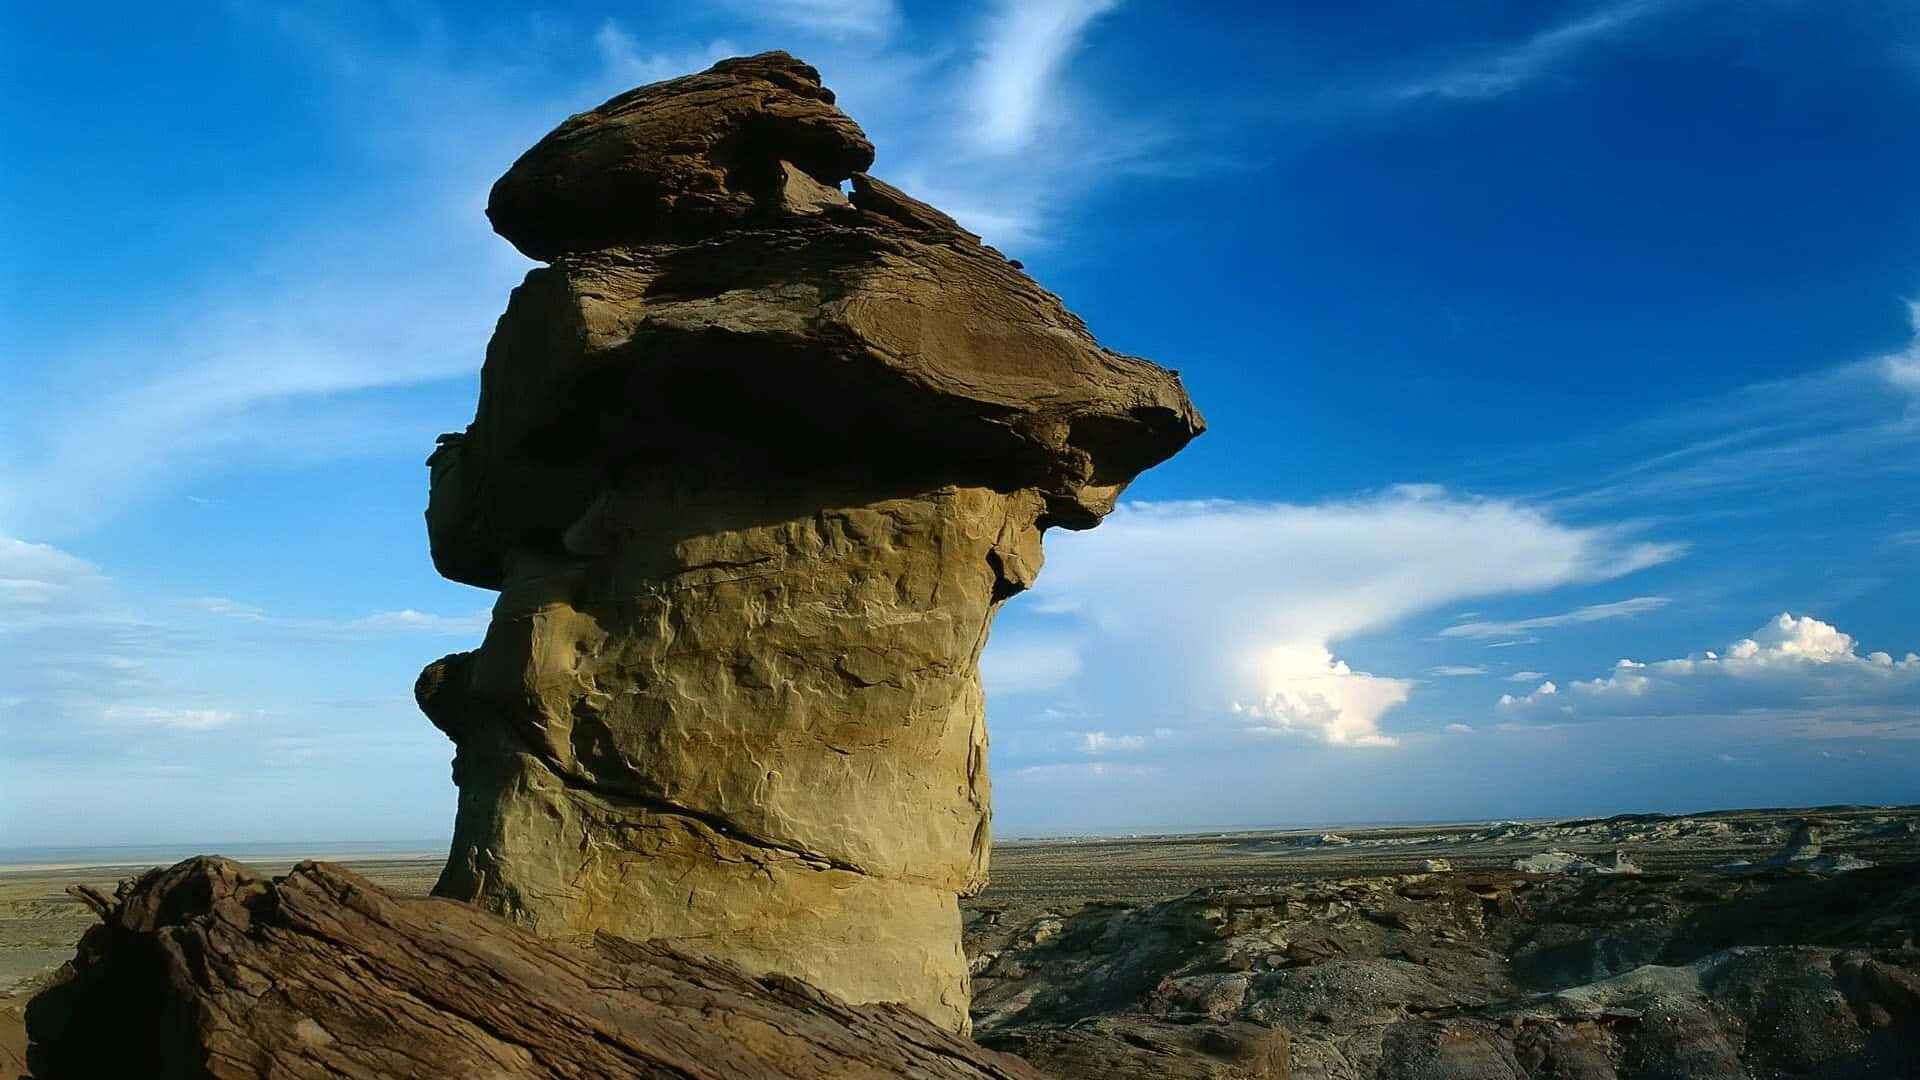 A Rock Formation In The Desert With A Blue Sky